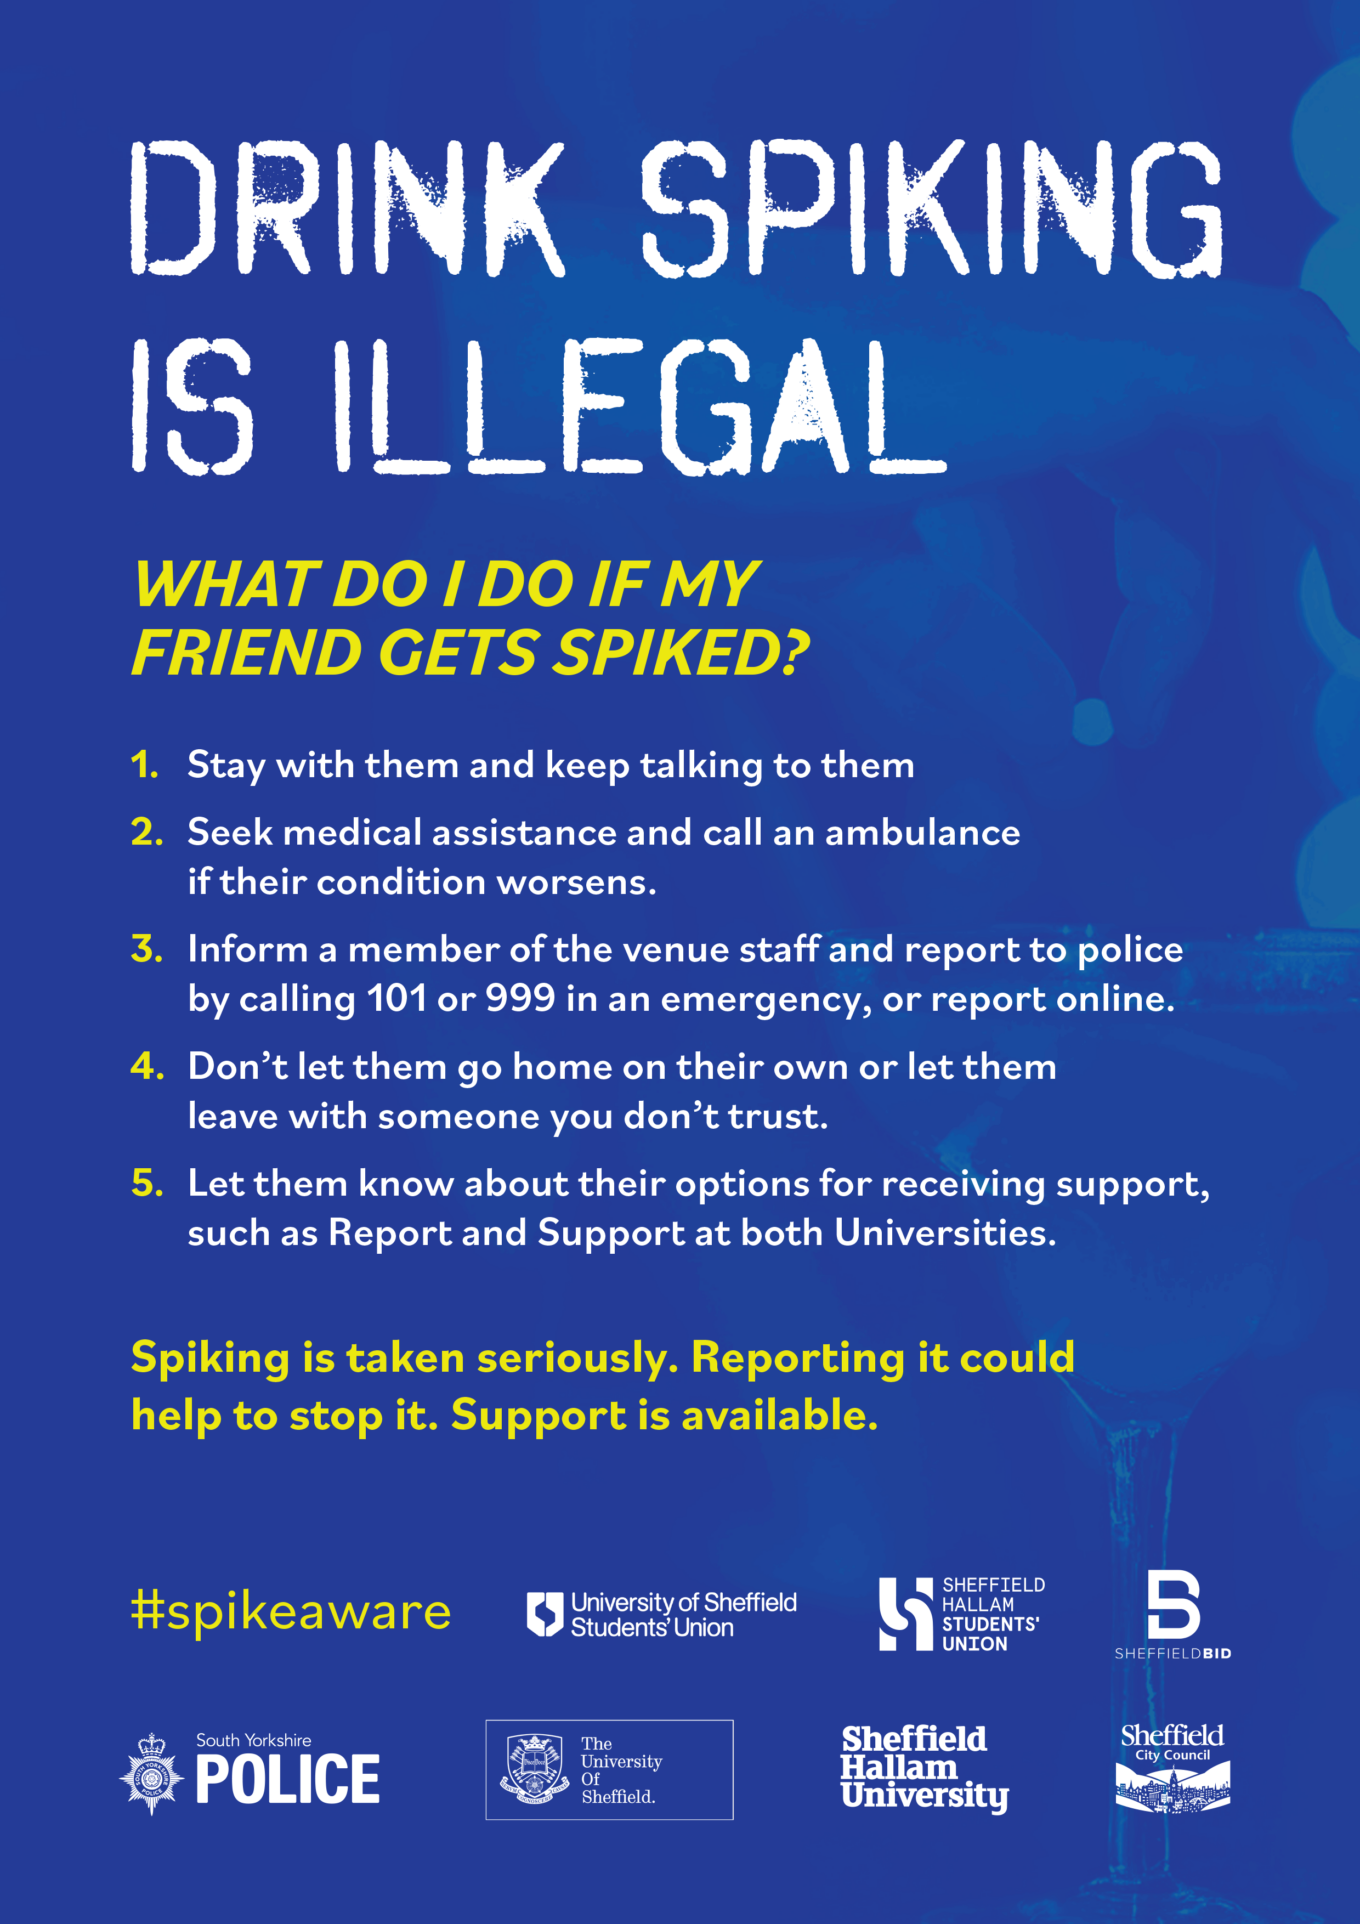 Drink Spiking Is Illegal poster aimed at friends of victims